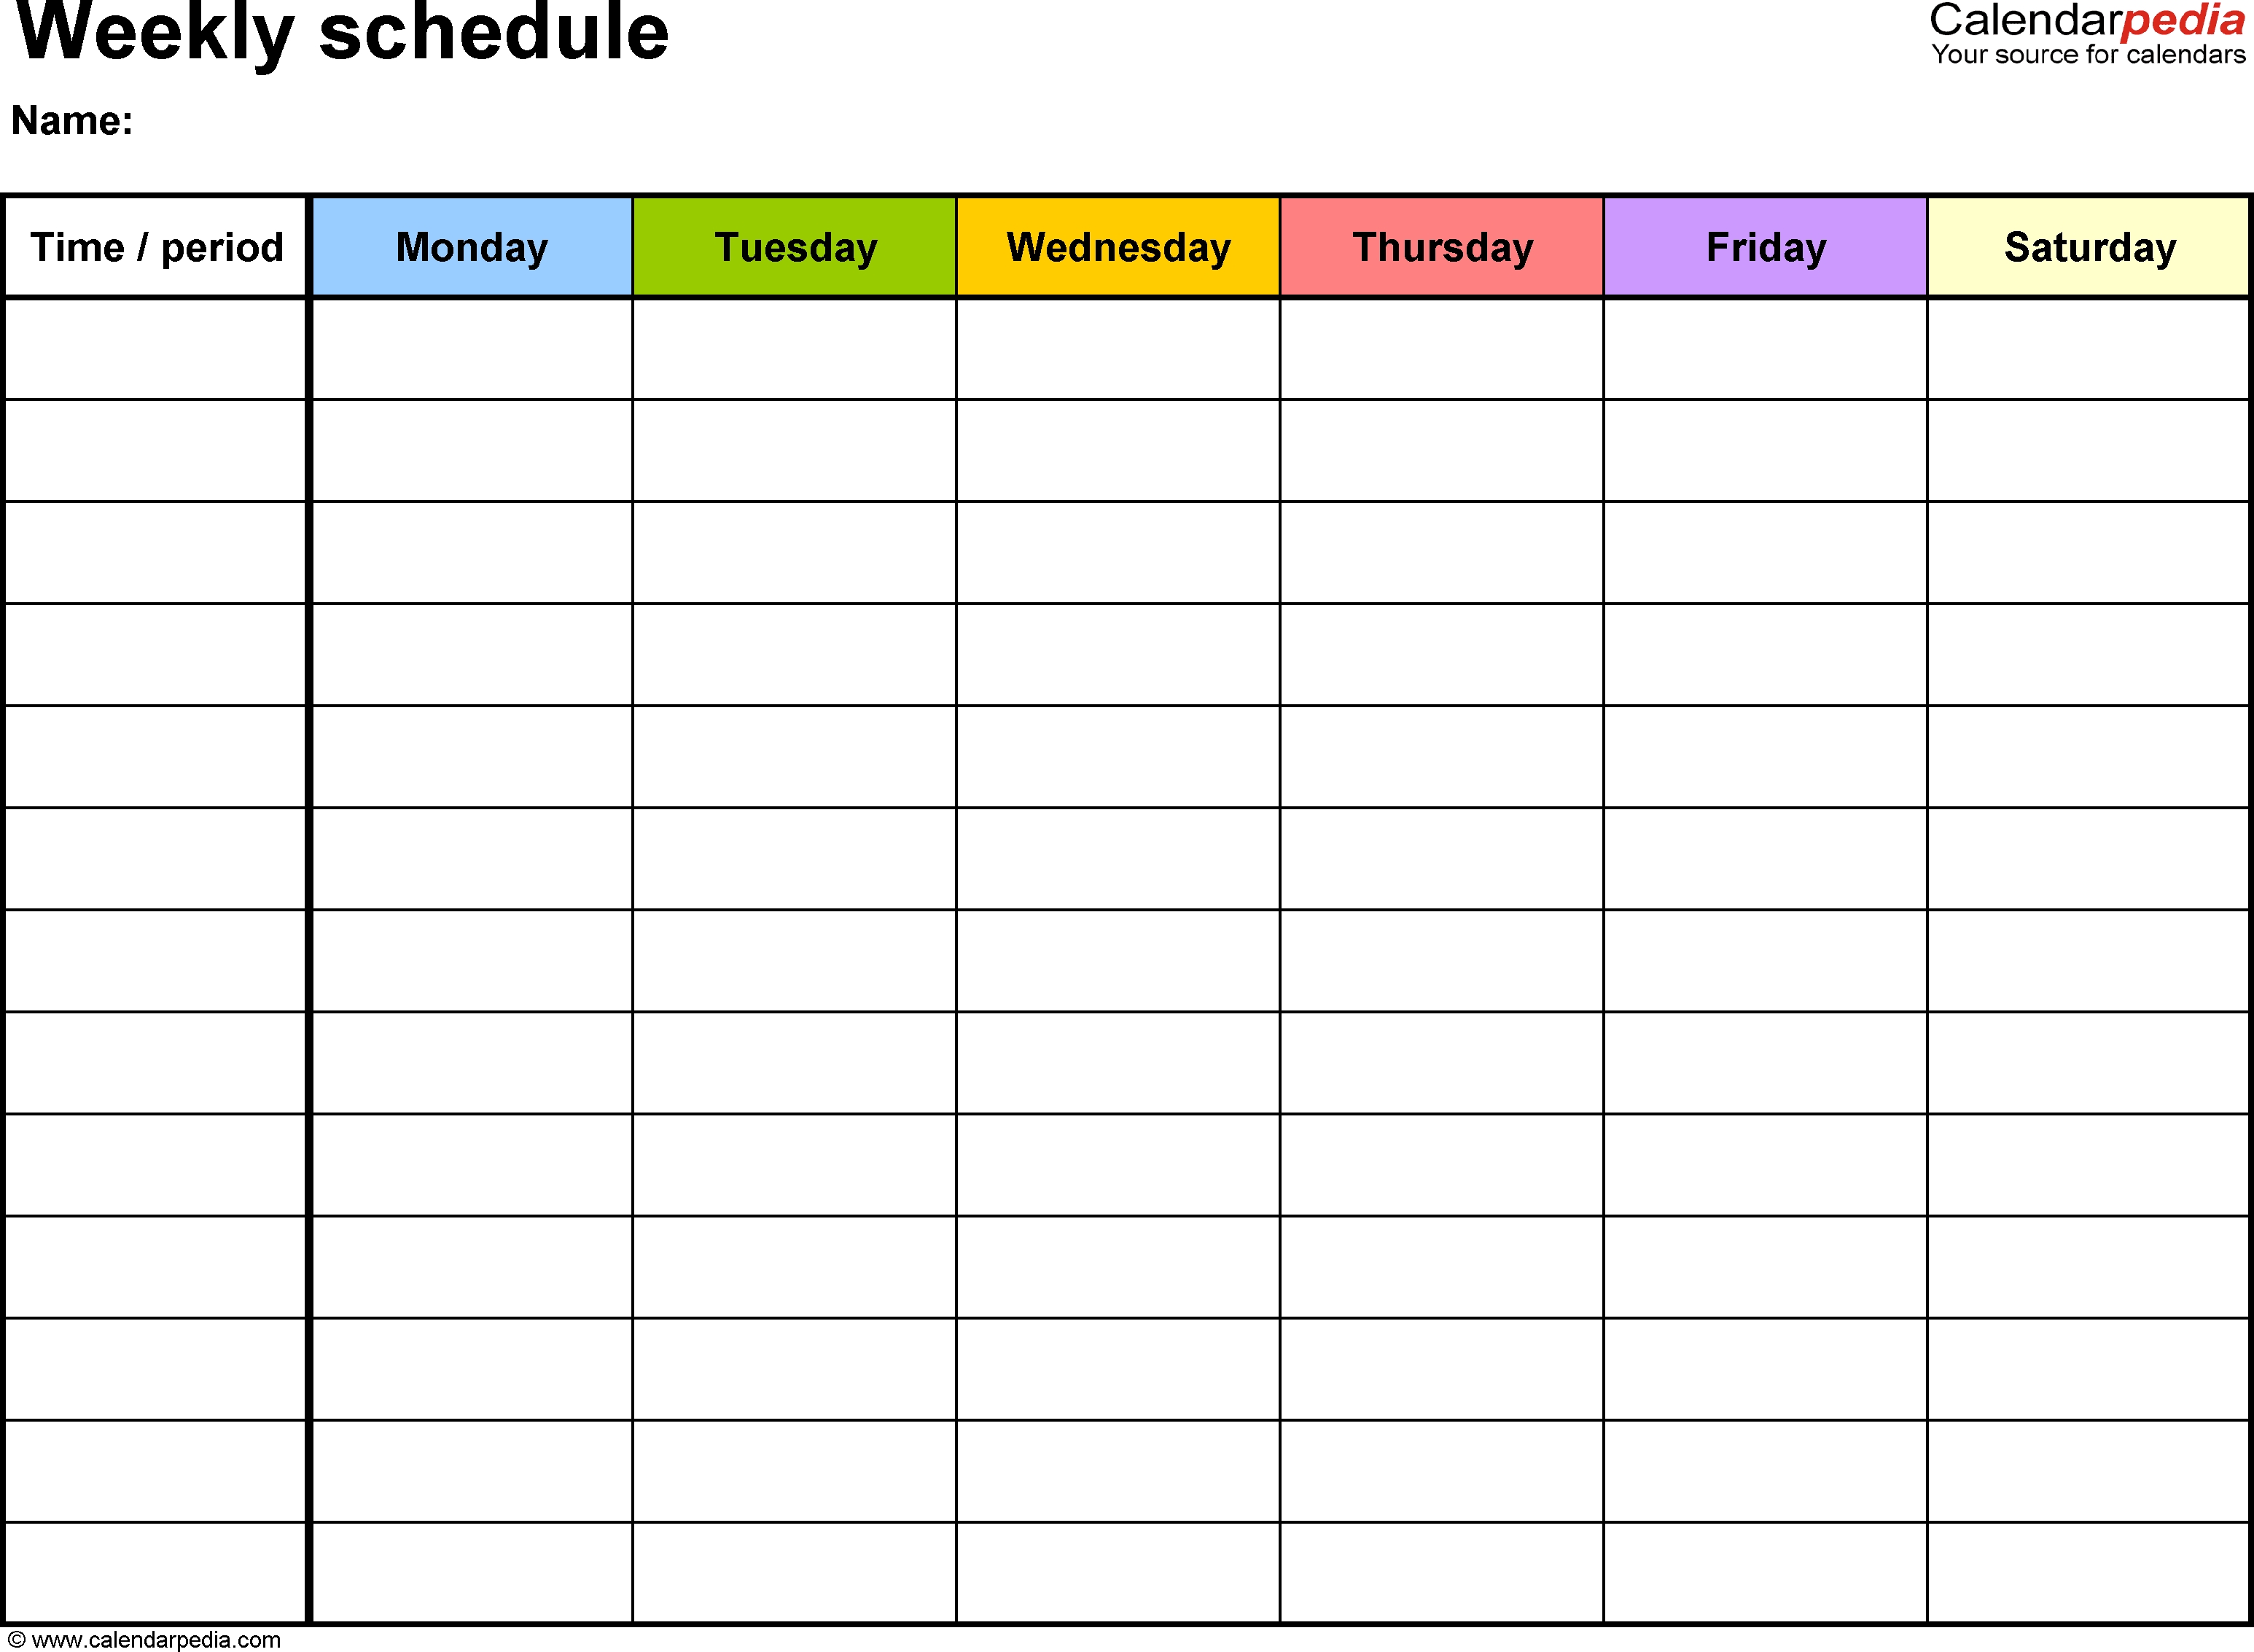 Free Weekly Schedule Templates For Word - 18 Templates-Summer Camp Schedule Template Editable